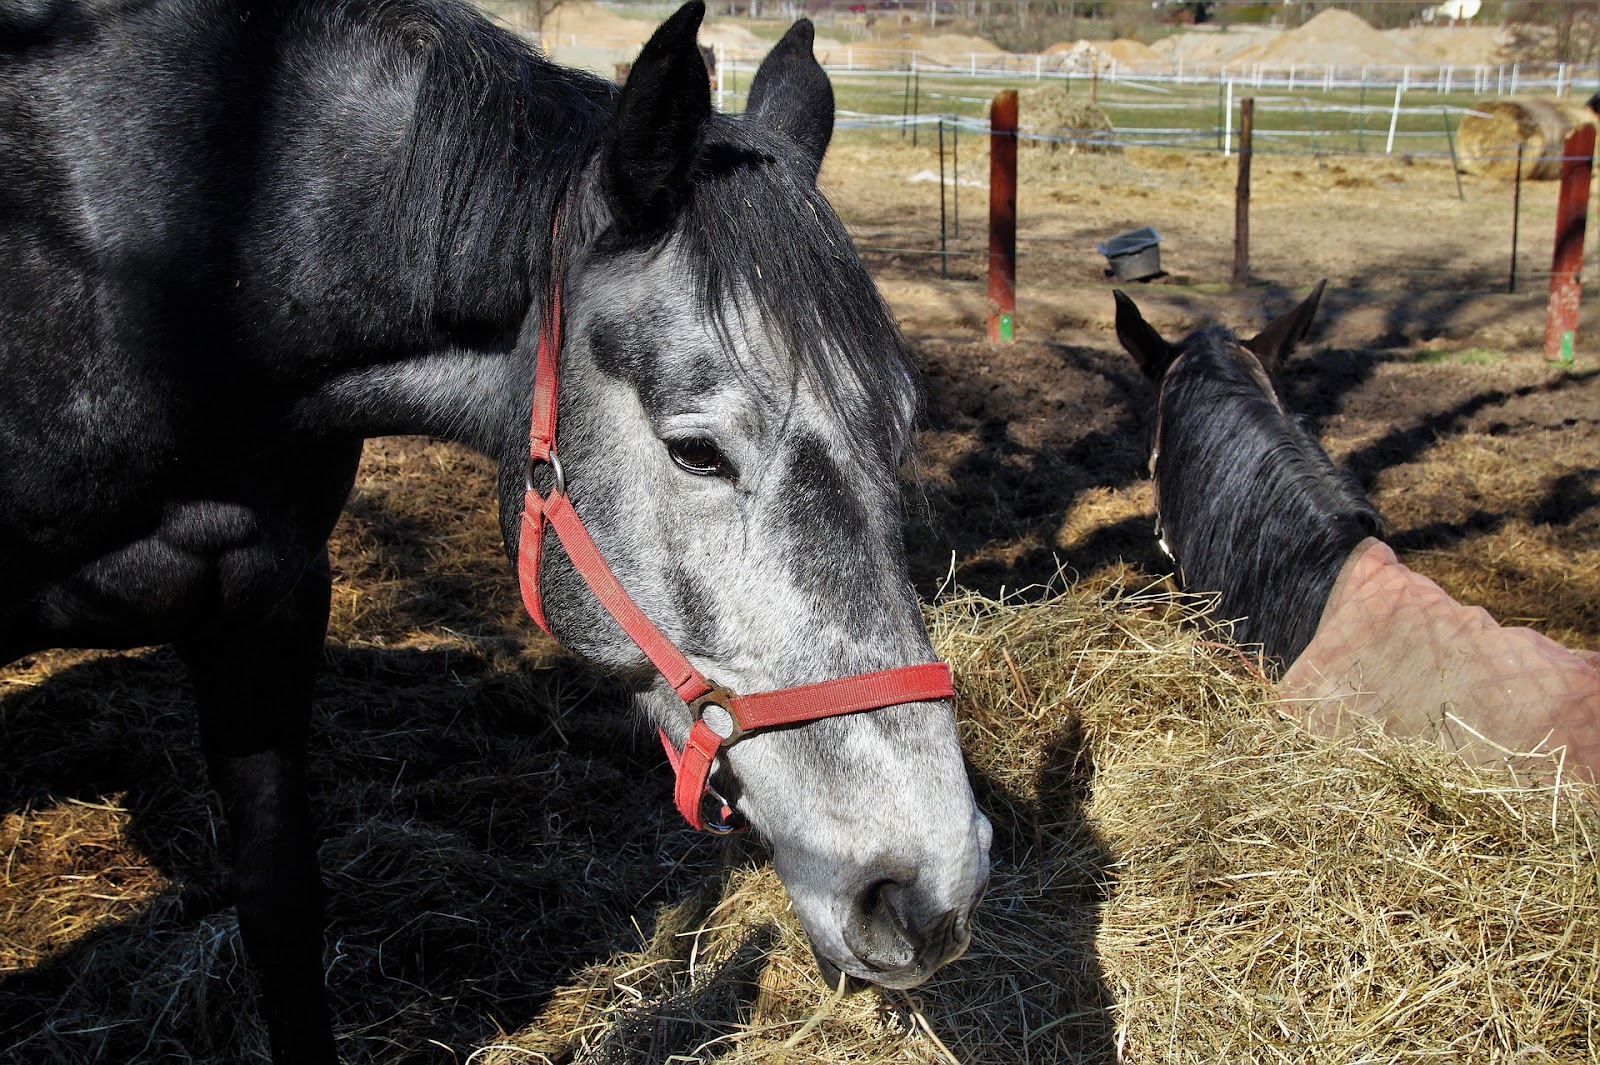 An old black horse with a grey face wears a red halter while eating hay